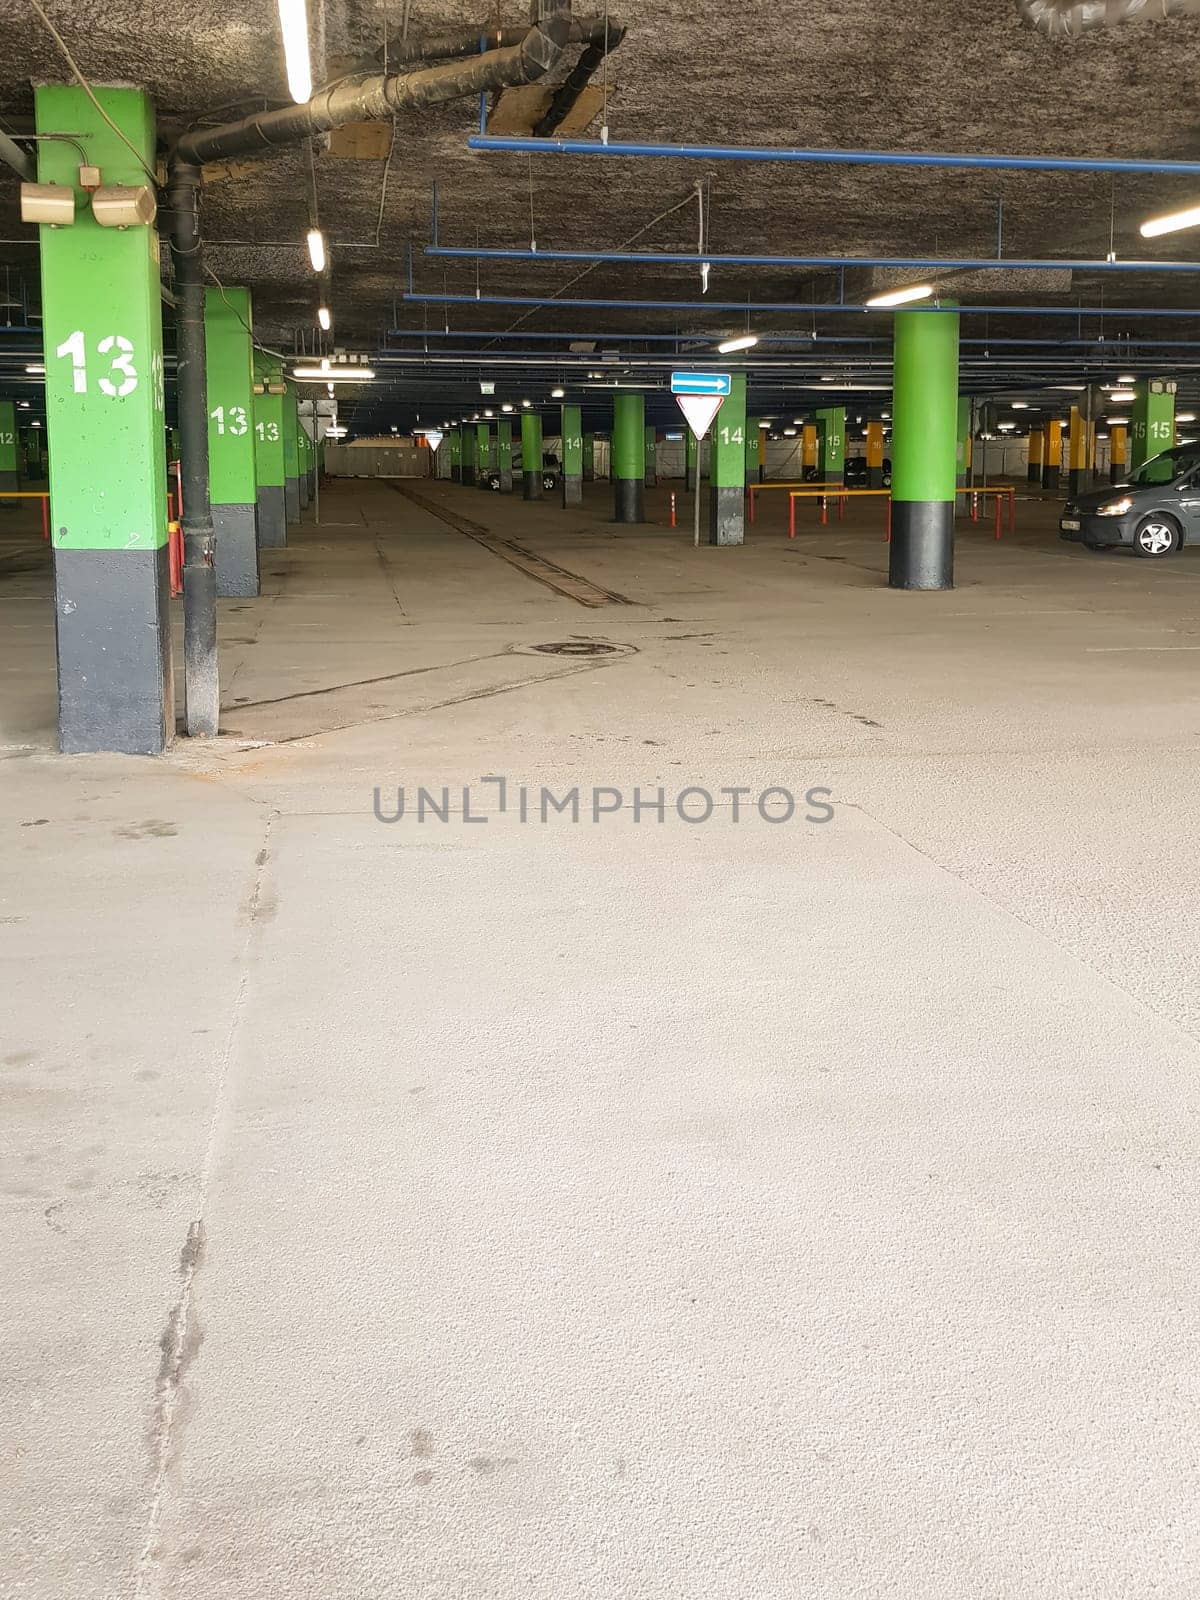 Underground Parking with poles with markings for cars in the shopping center, a place for text at the bottom.